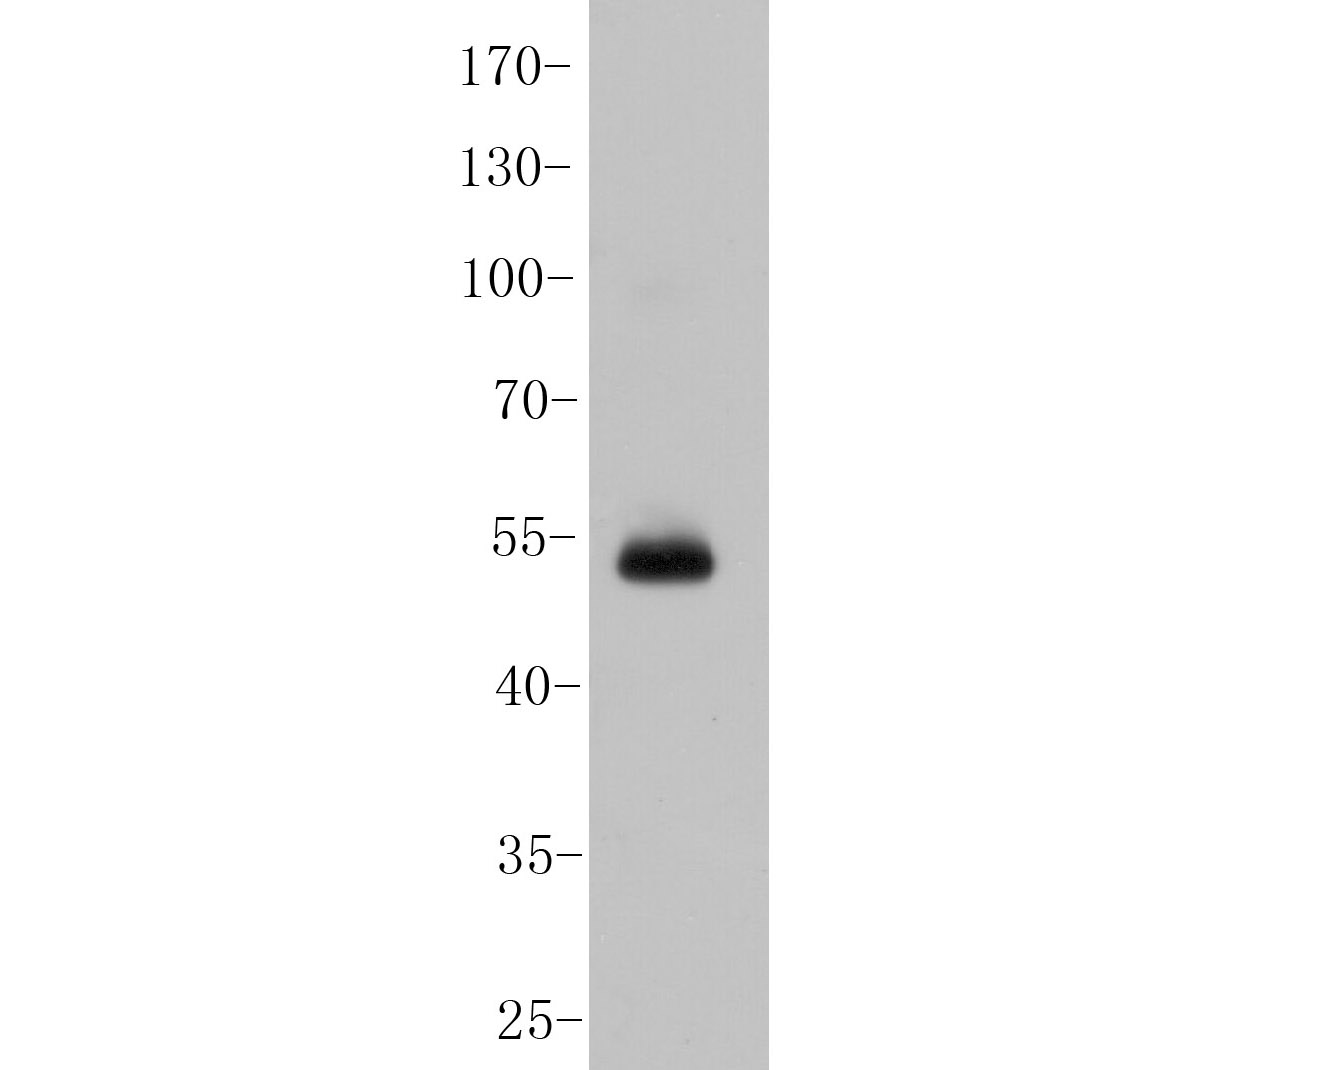 Western blot analysis of USP21 on SHSY5Y cell  lysates. Proteins were transferred to a PVDF membrane and blocked with 5% BSA in PBS for 1 hour at room temperature. The primary antibody (ER1901-67, 1/1000) was used in 5% BSA at room temperature for 2 hours. Goat Anti-Rabbit IgG - HRP Secondary Antibody (HA1001) at 1:5,000 dilution was used for 1 hour at room temperature.